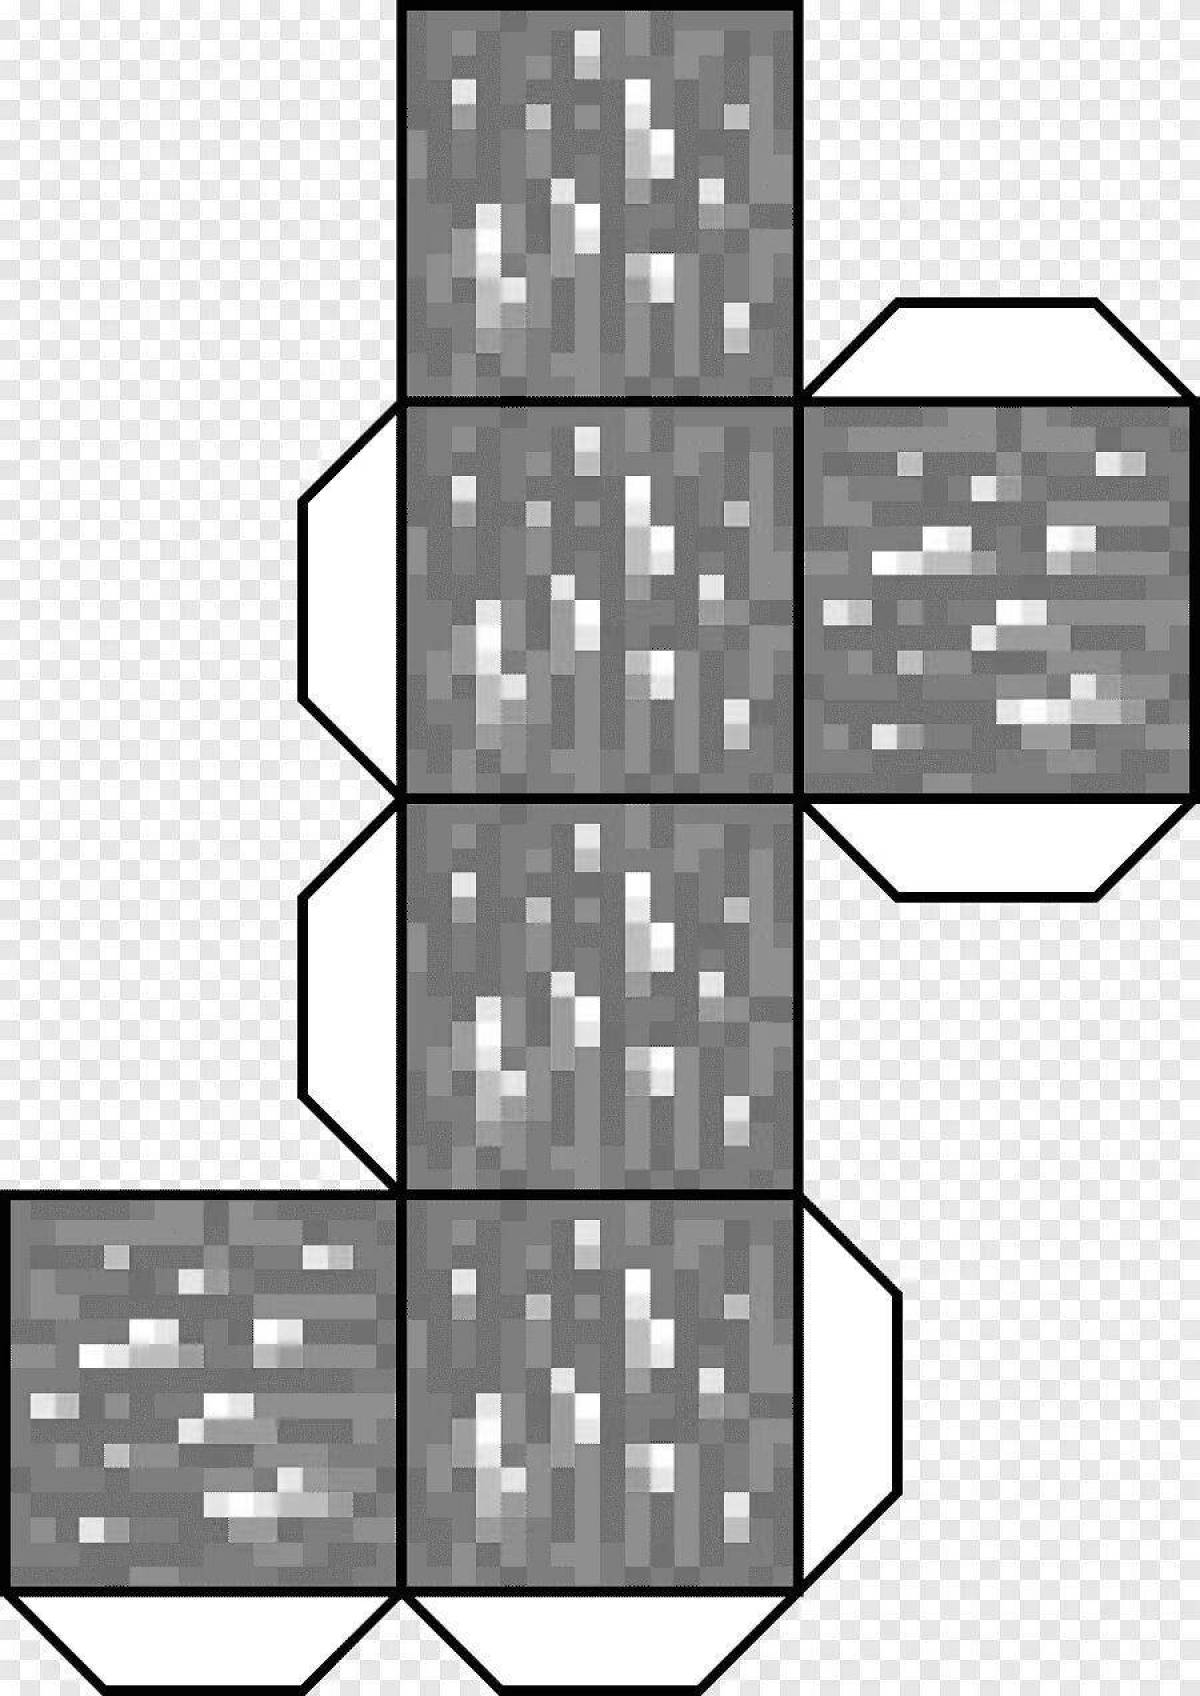 Minecraft make bright coloring page